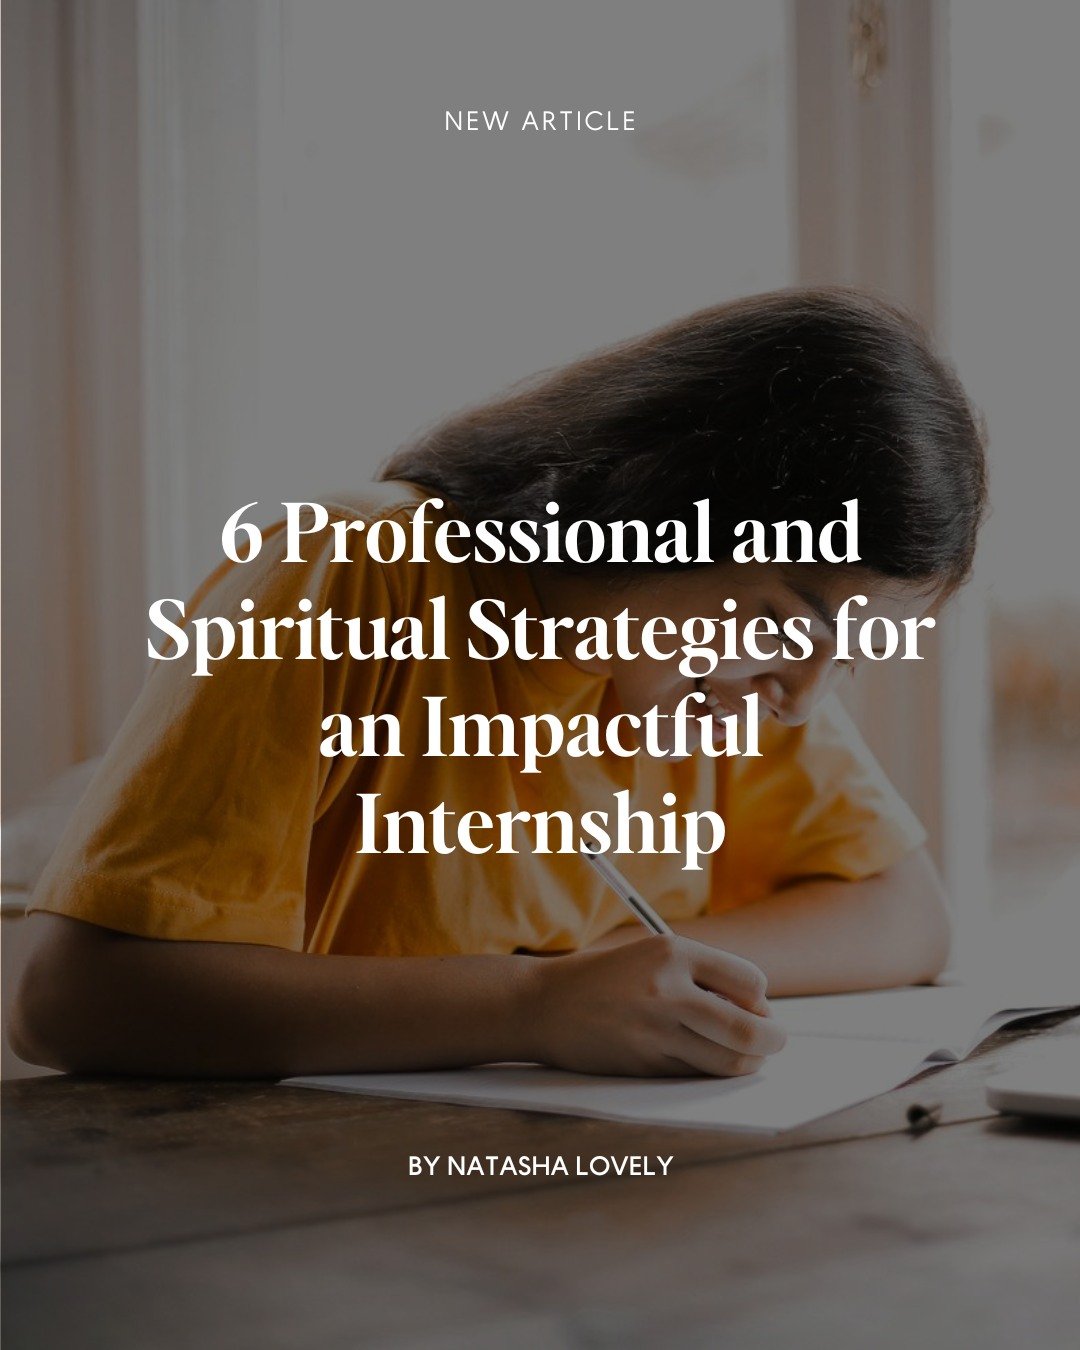 &ldquo;In the often complex and secular landscape of the business world, holding onto your values is essential. Finding a spiritual mentor who embodies faith and professionalism can offer guidance and wisdom, serving as a good model for navigating yo